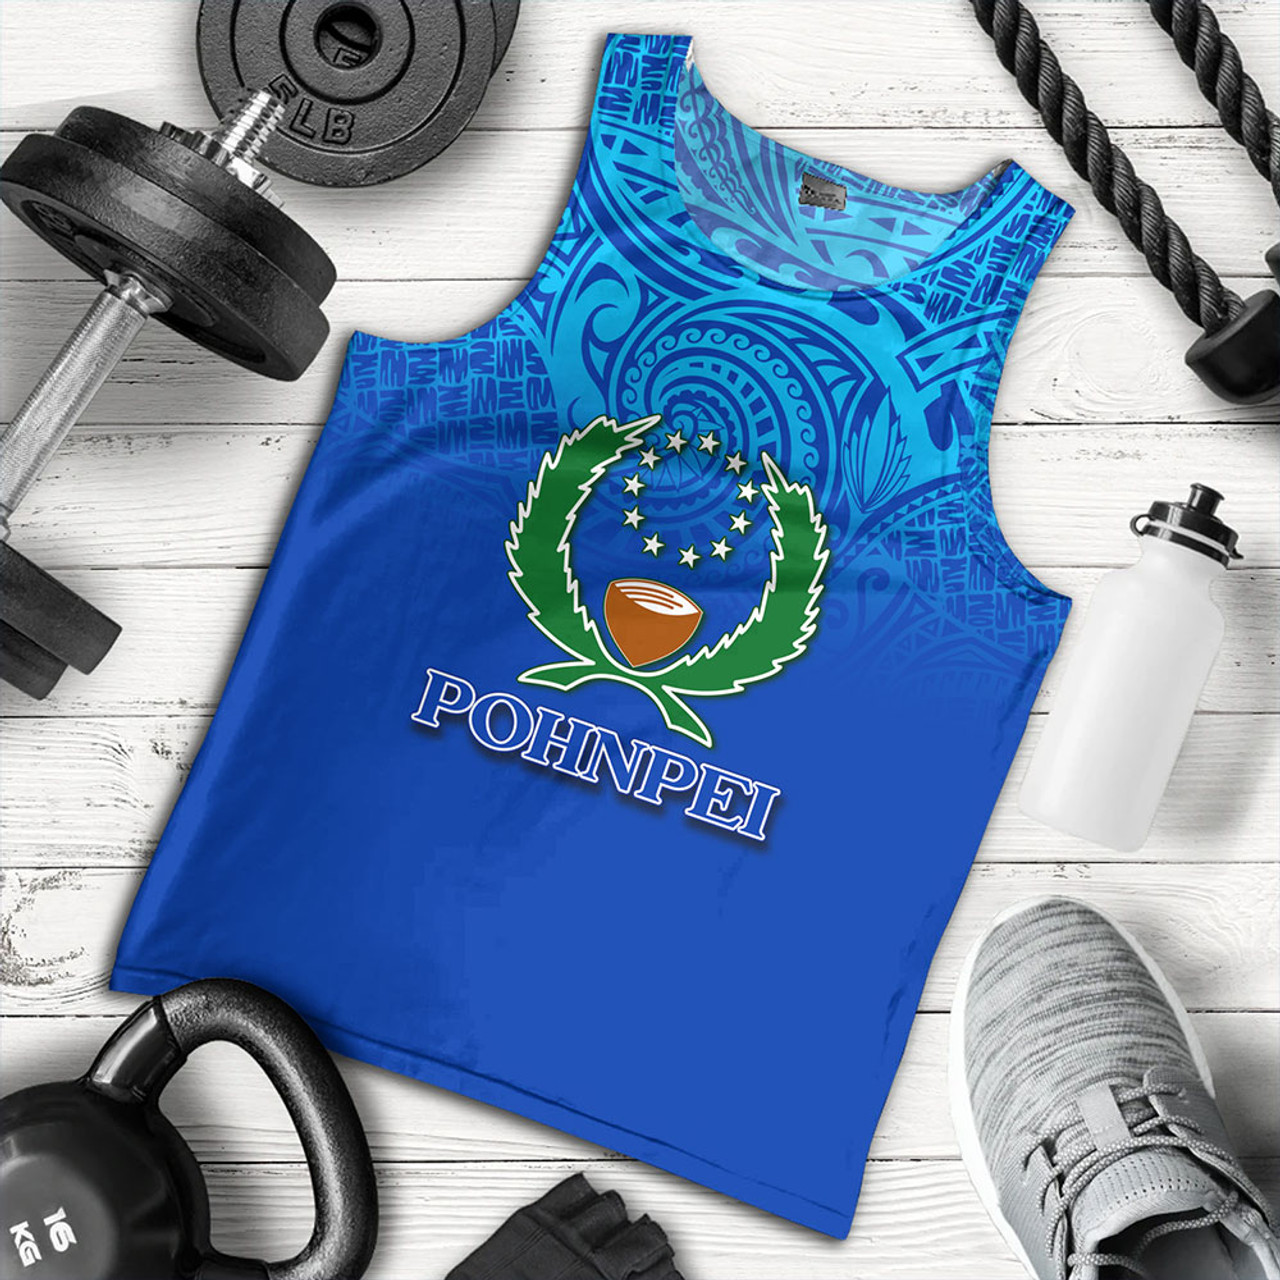 Pohnpei State Tank Top Flag Color With Traditional Patterns